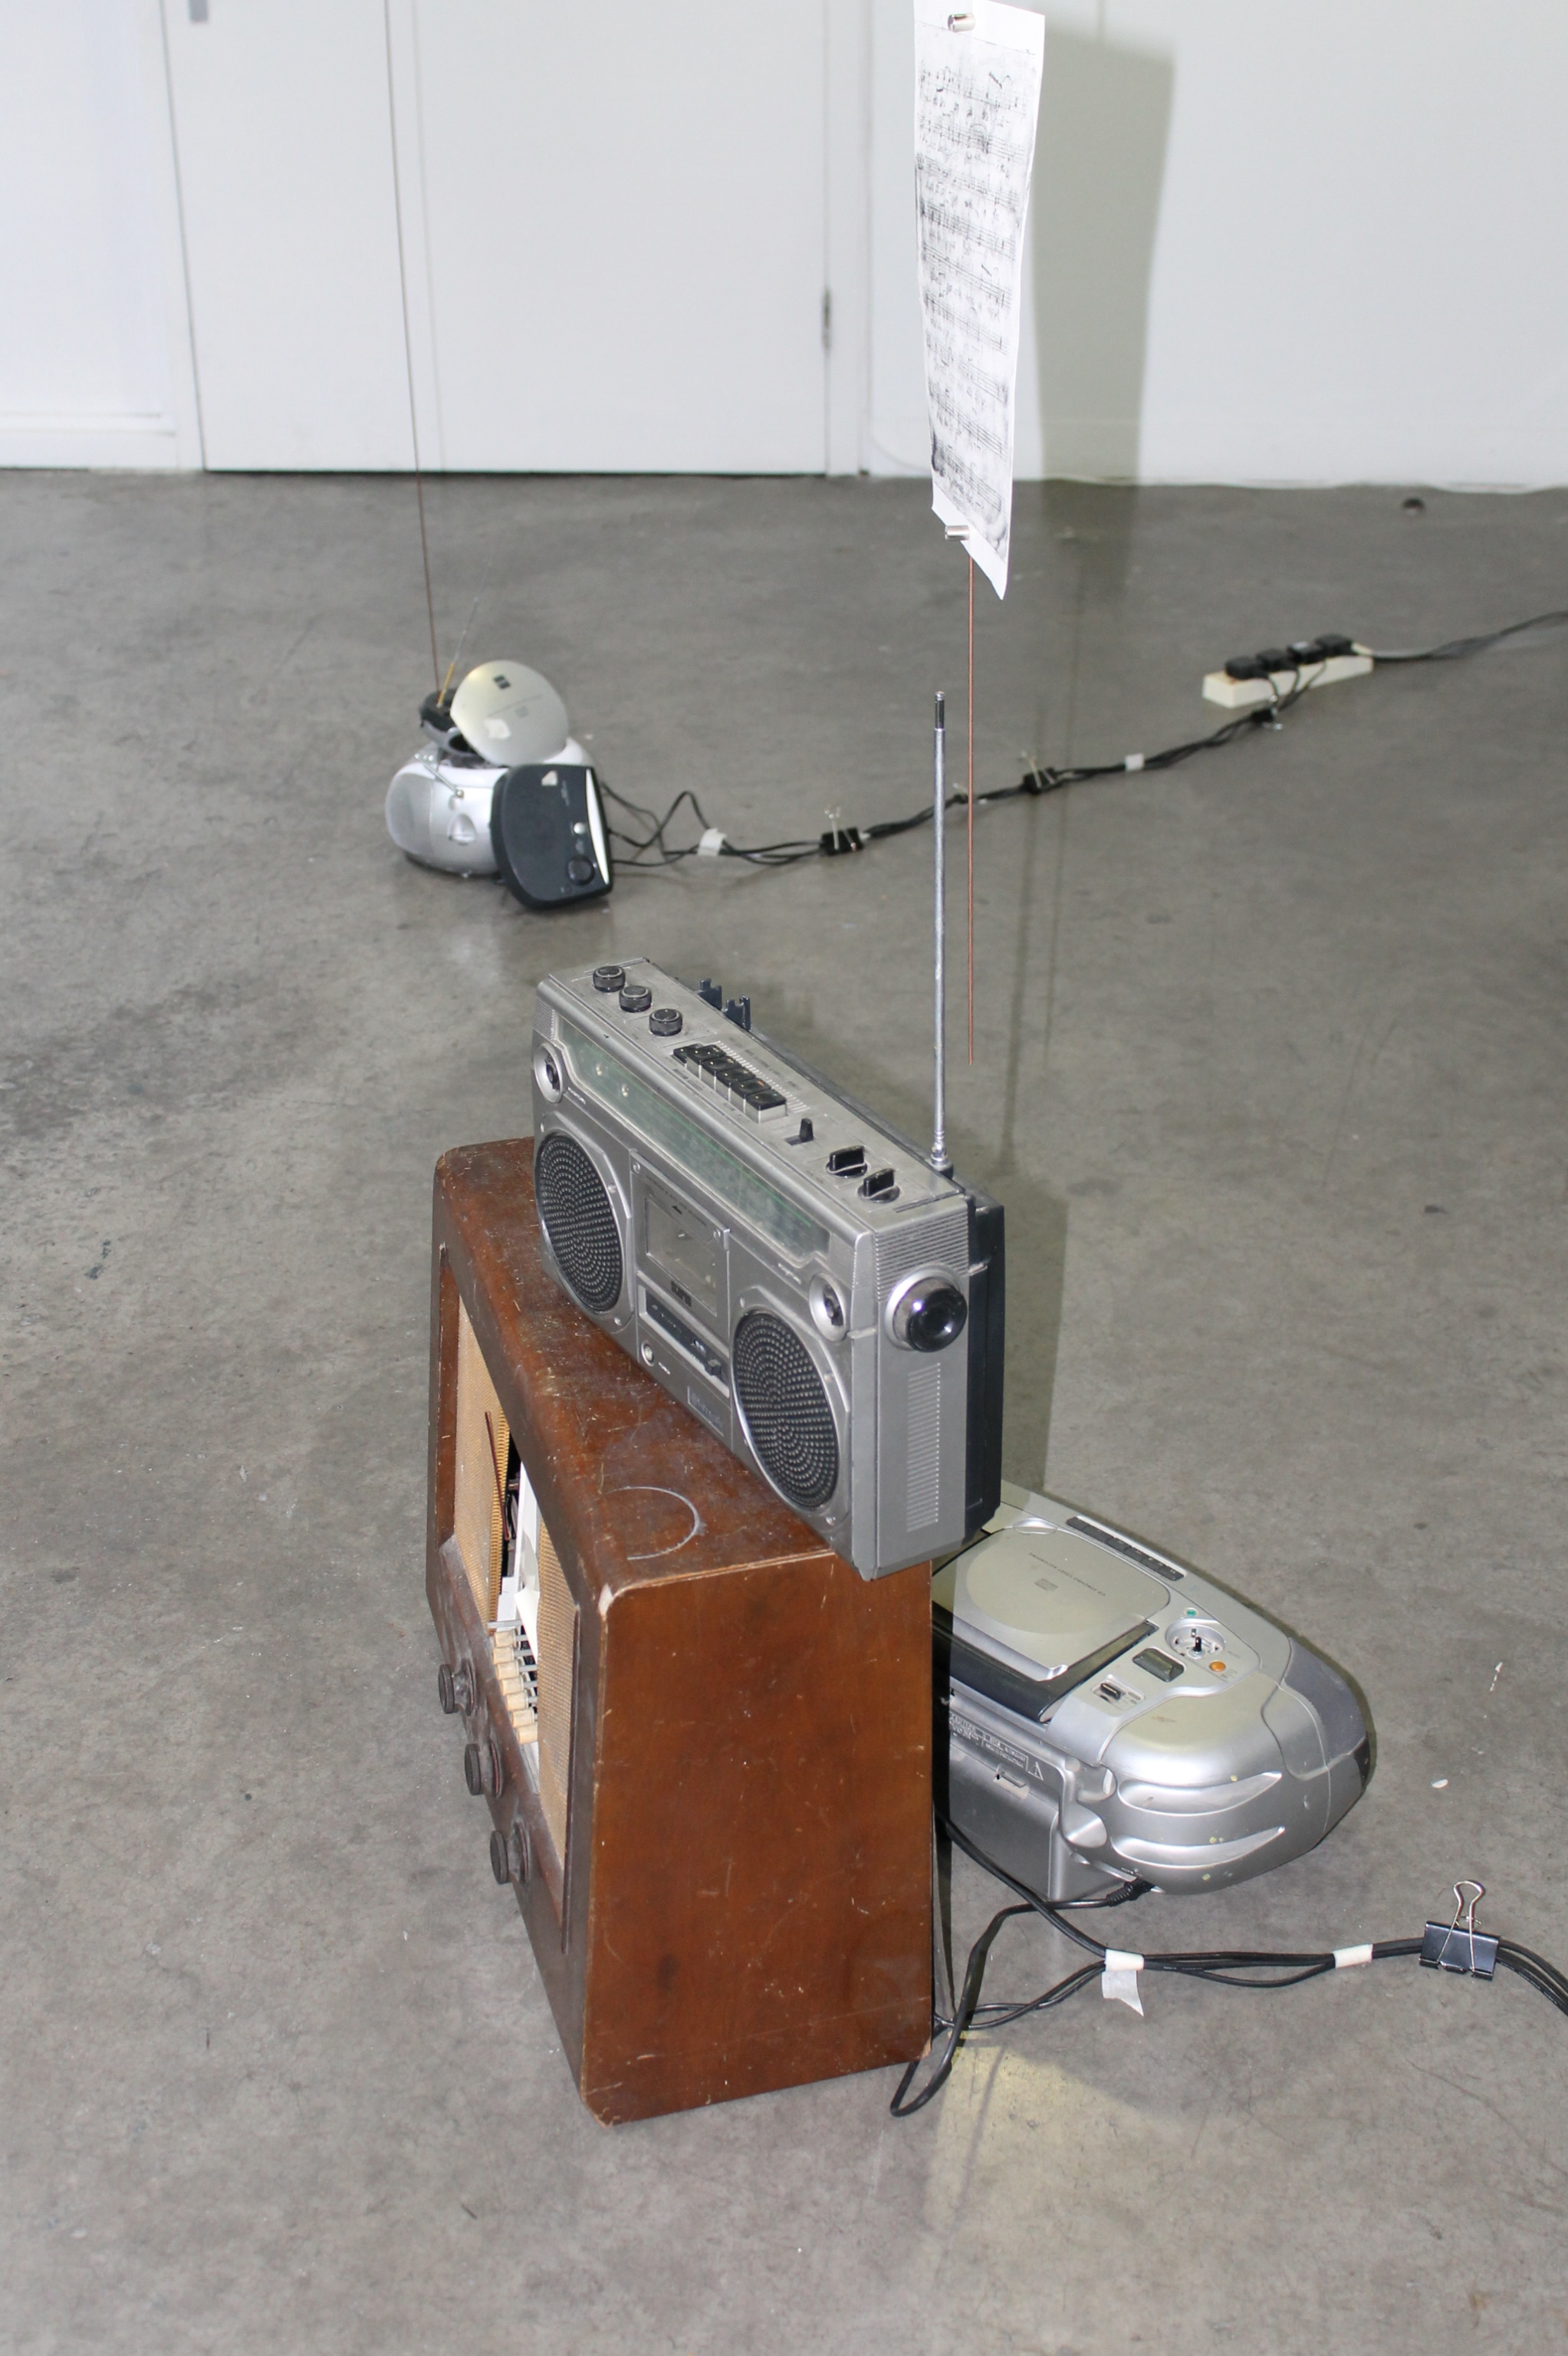 Theories: AirMusic, radios, etchings, welding rod, produced in collaboration with Joseph Bonfield, https://tunnellingartandphysics.wordpress.com/2012/06/19/radios-clip/.